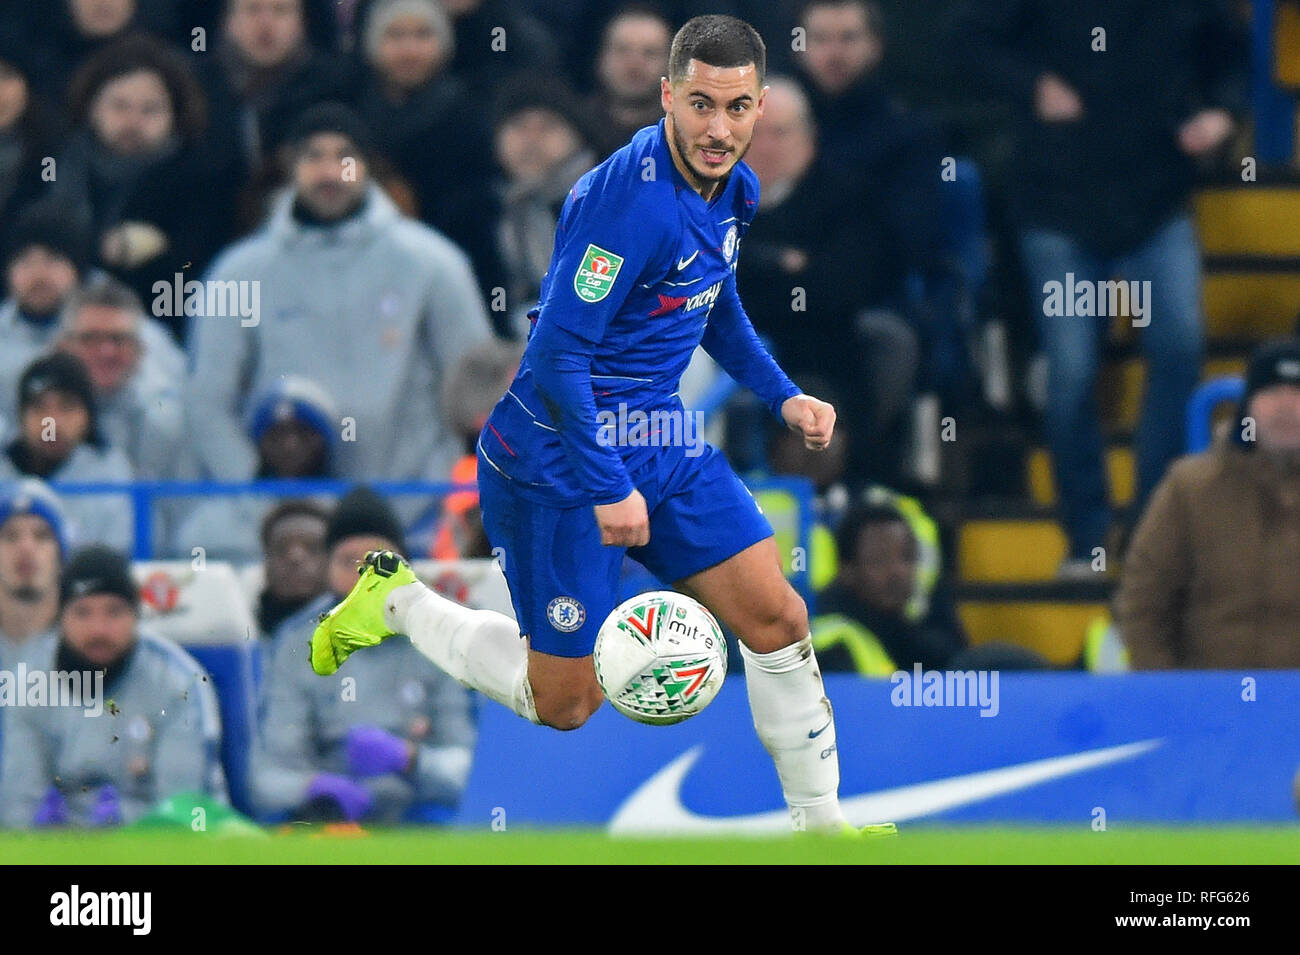 LONDON, UK 24 JANUARY Chelsea midfielder Eden Hazard in action during the Carabao Cup match between Chelsea and Tottenham Hotspur at Stamford Bridge, London on Thursday 24th January 2019. (Photo Credit: MI News & Sport) Stock Photo